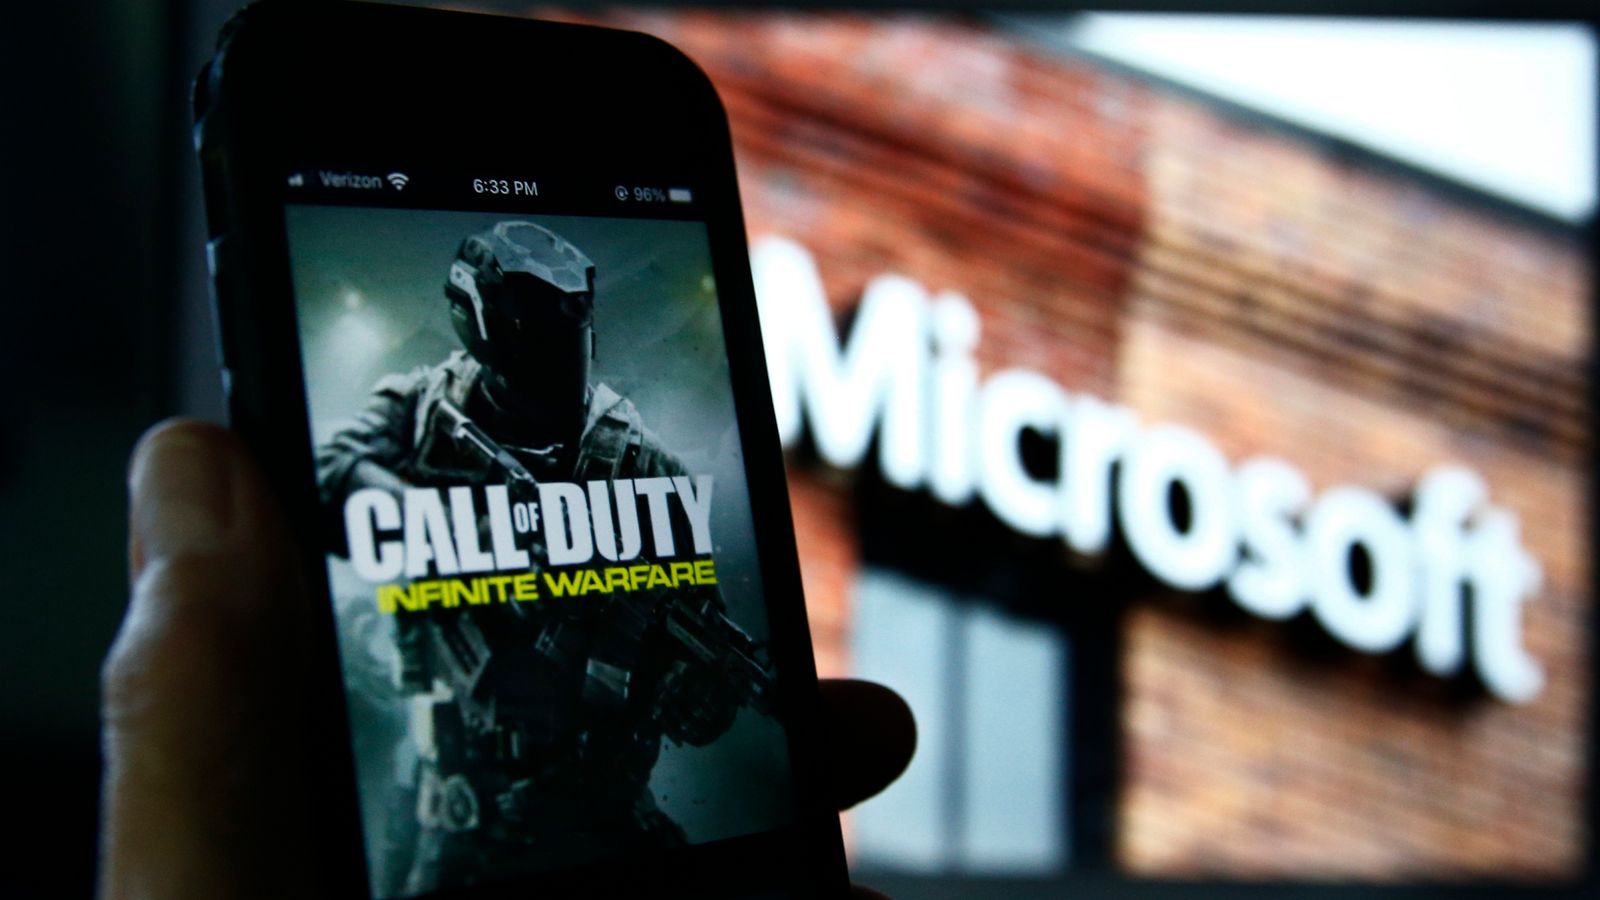 Microsoft's determined to buy the maker of Call Of Duty - but will the UK allow it? 